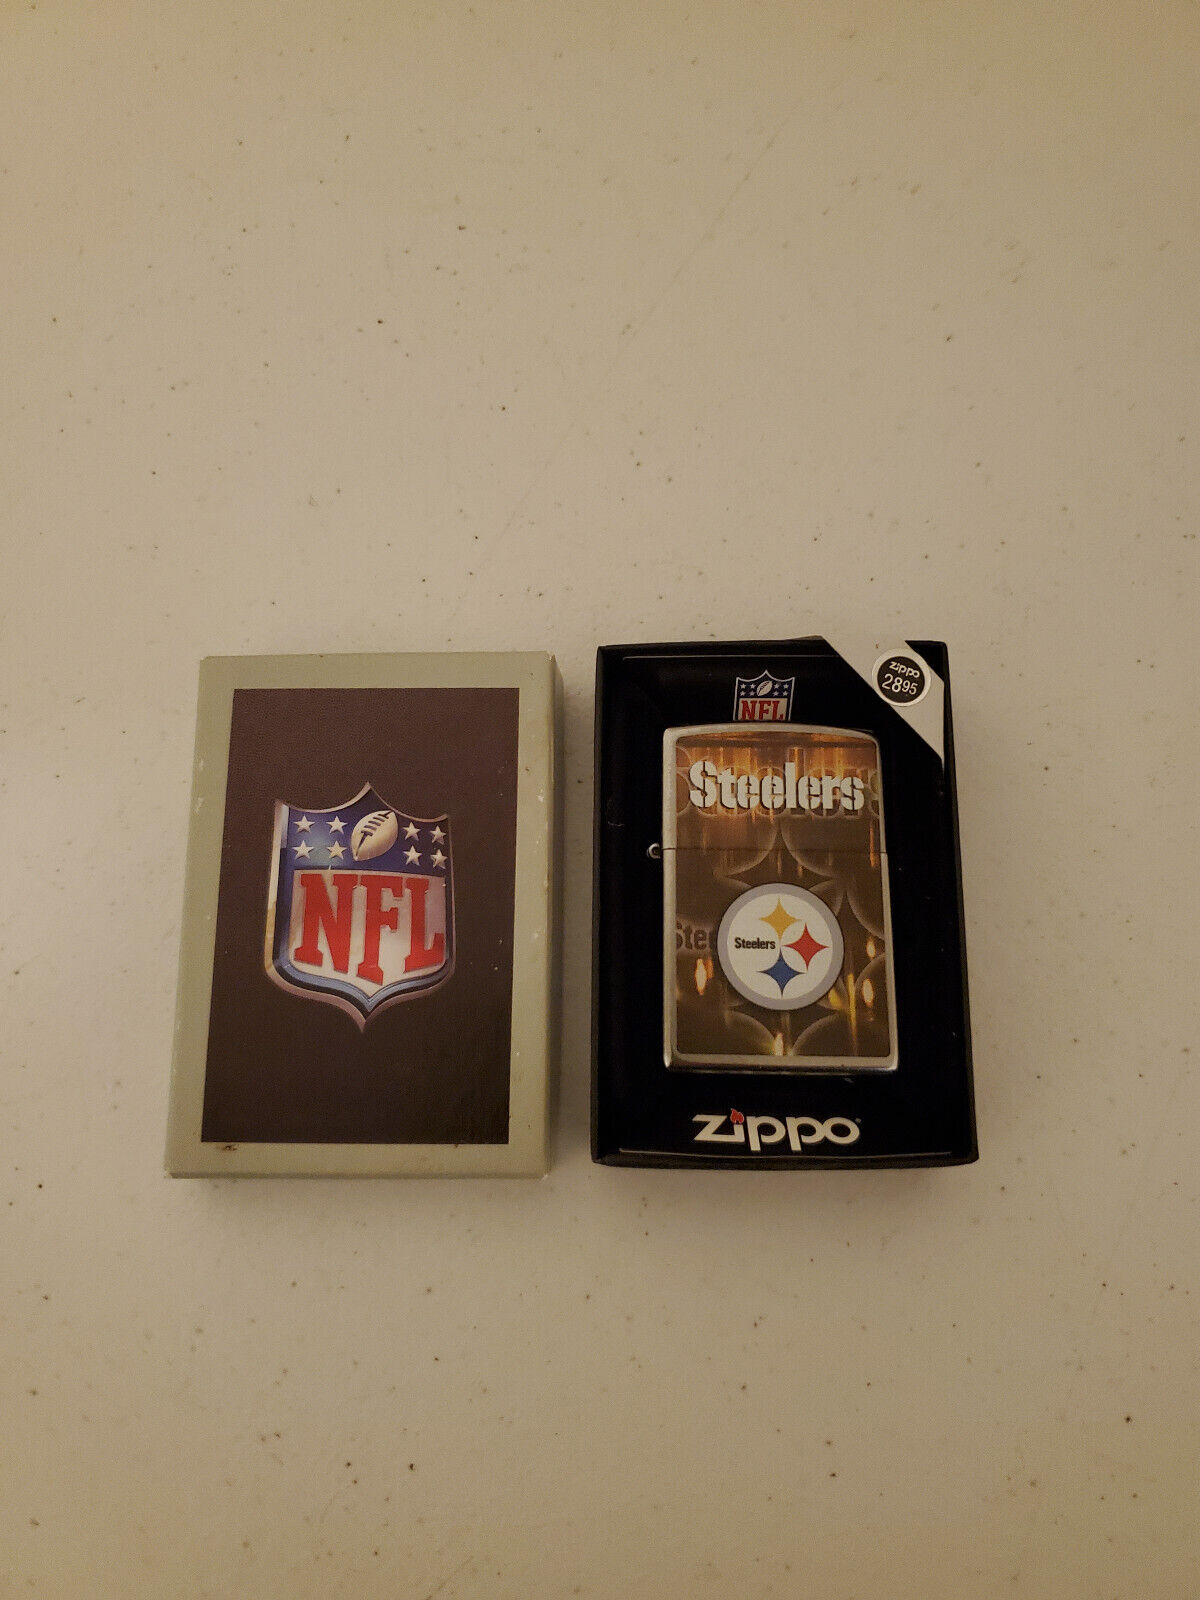 New - Zippo - NFL - Pittsburgh Steelers Lighter in Case